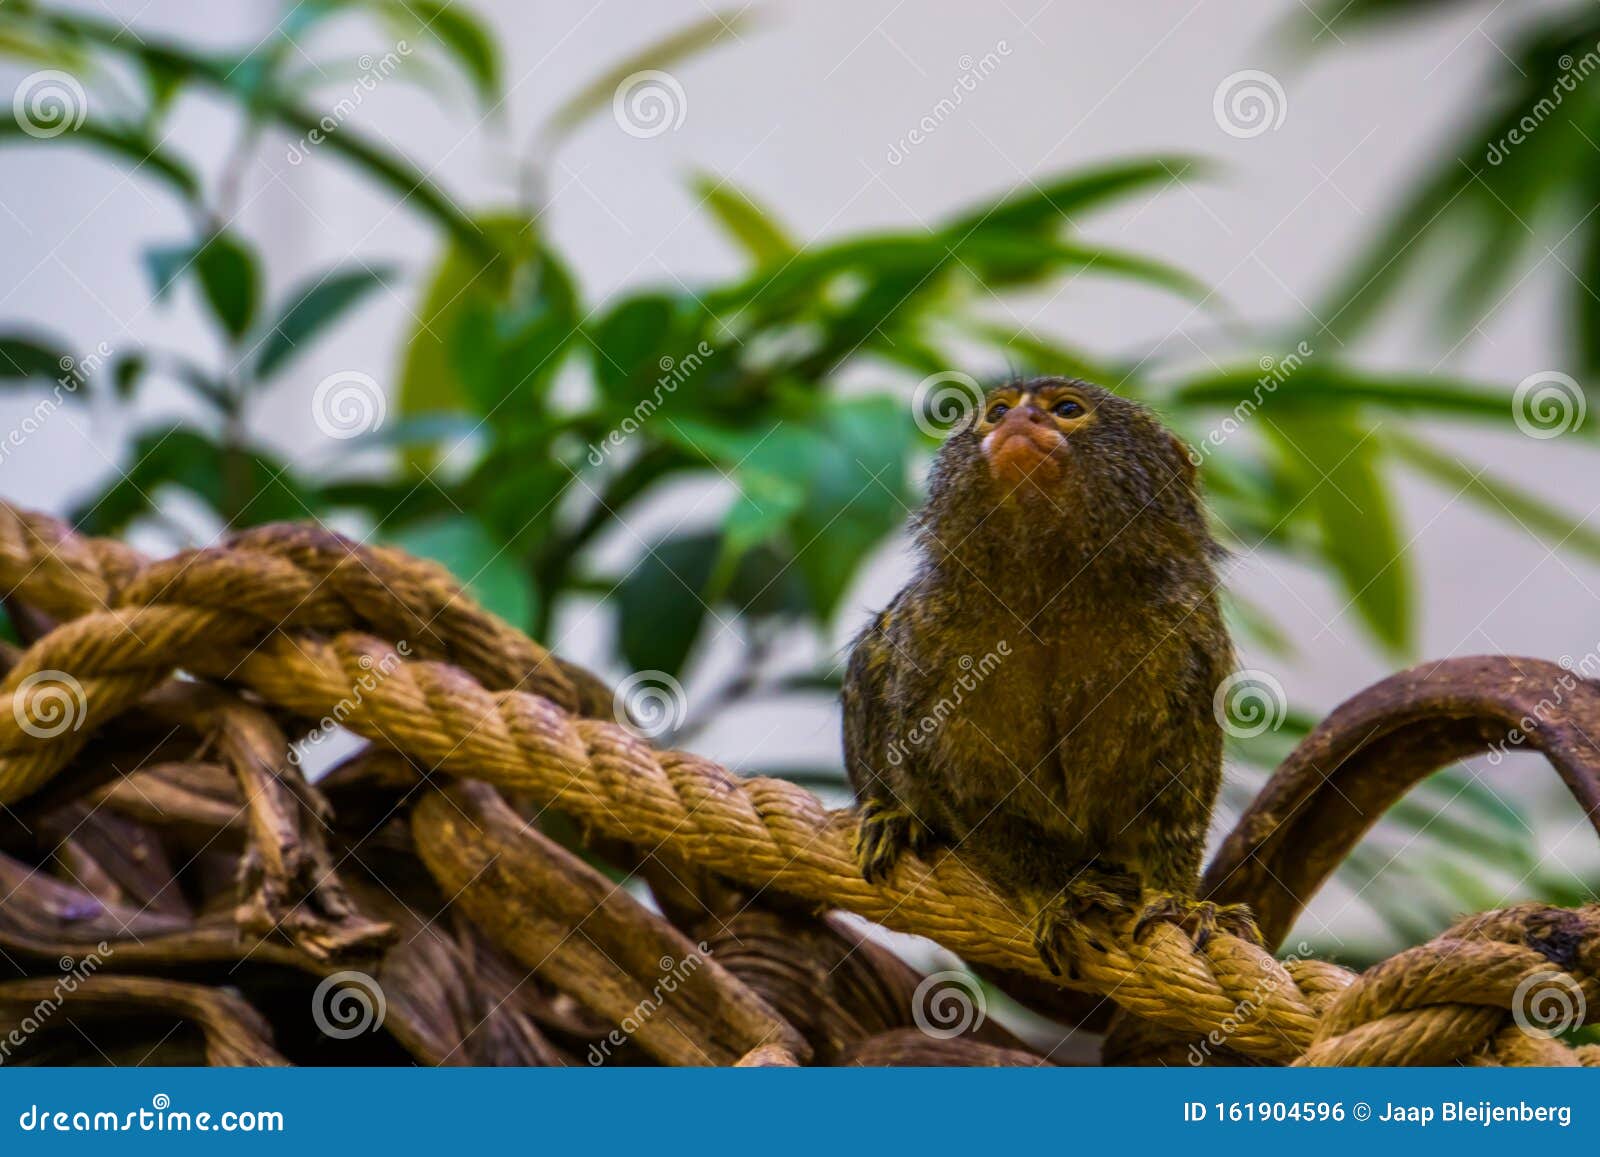 Pygmy Marmoset in Closeup, Small Cute Tropical Monkey, Exotic Animal Specie  from America Stock Photo - Image of callitrichidae, animal: 161904596